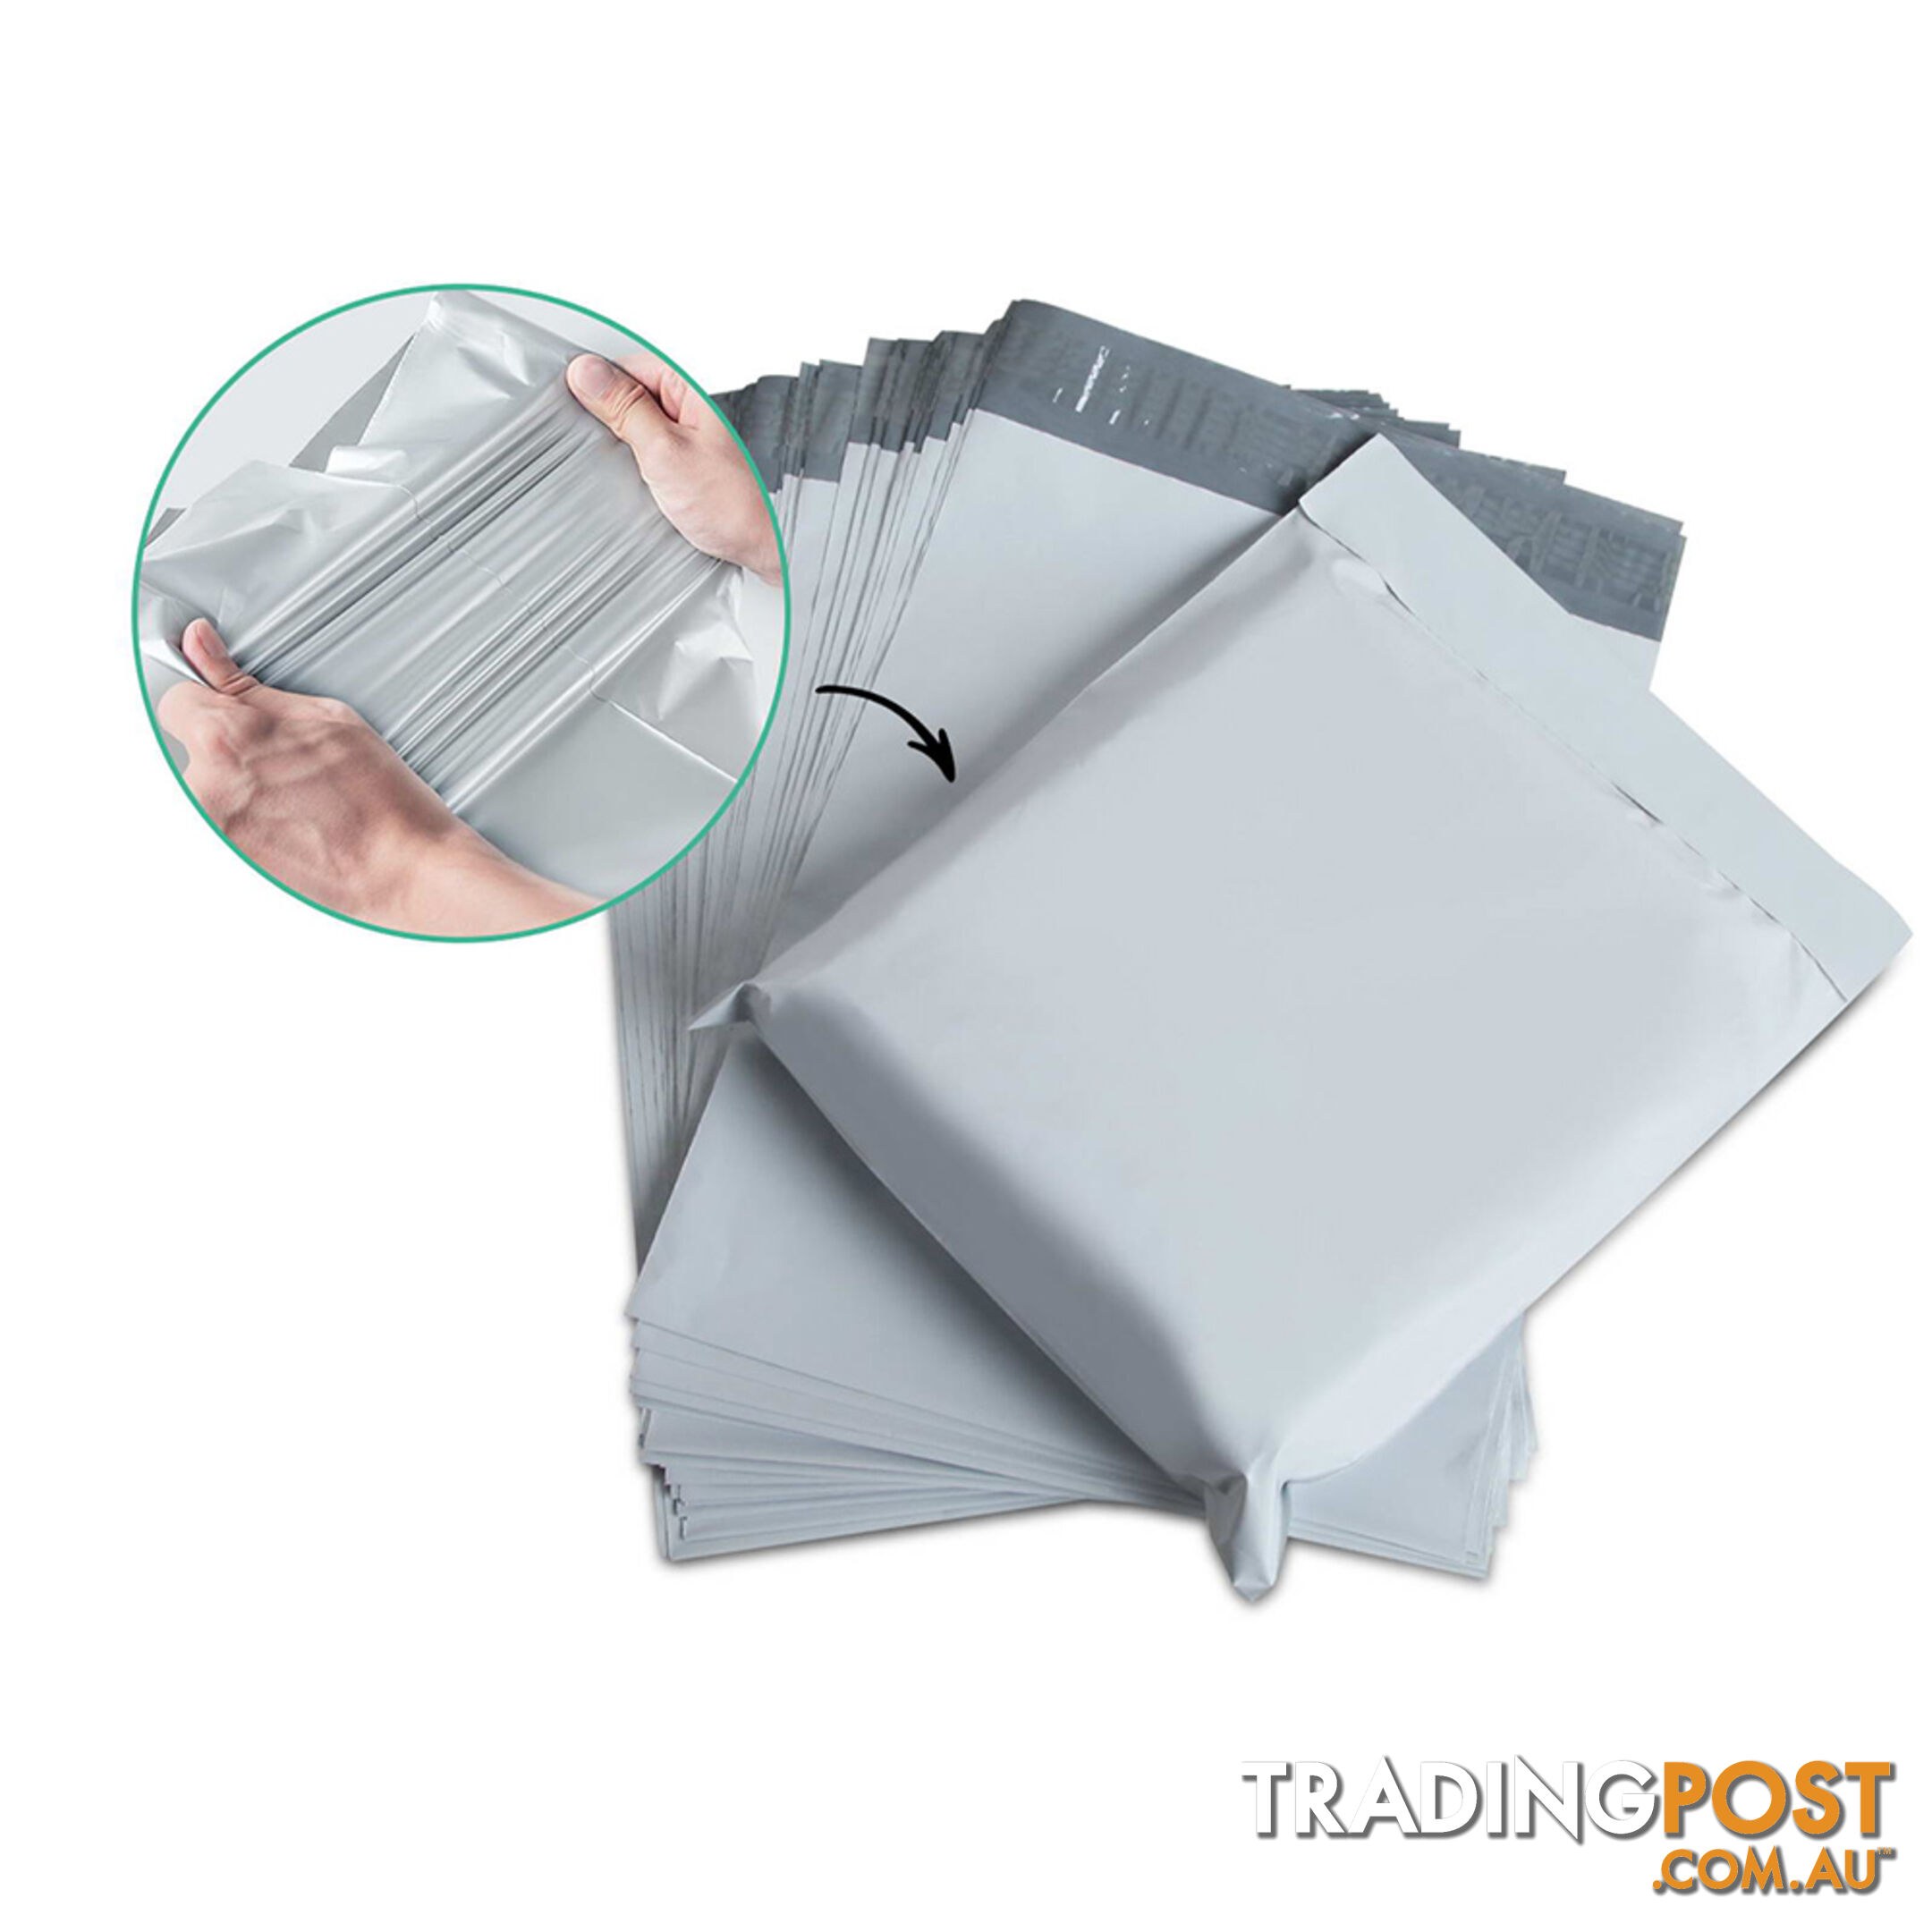 Set of 200 Poly Mailer Bags - 350 x 480mm